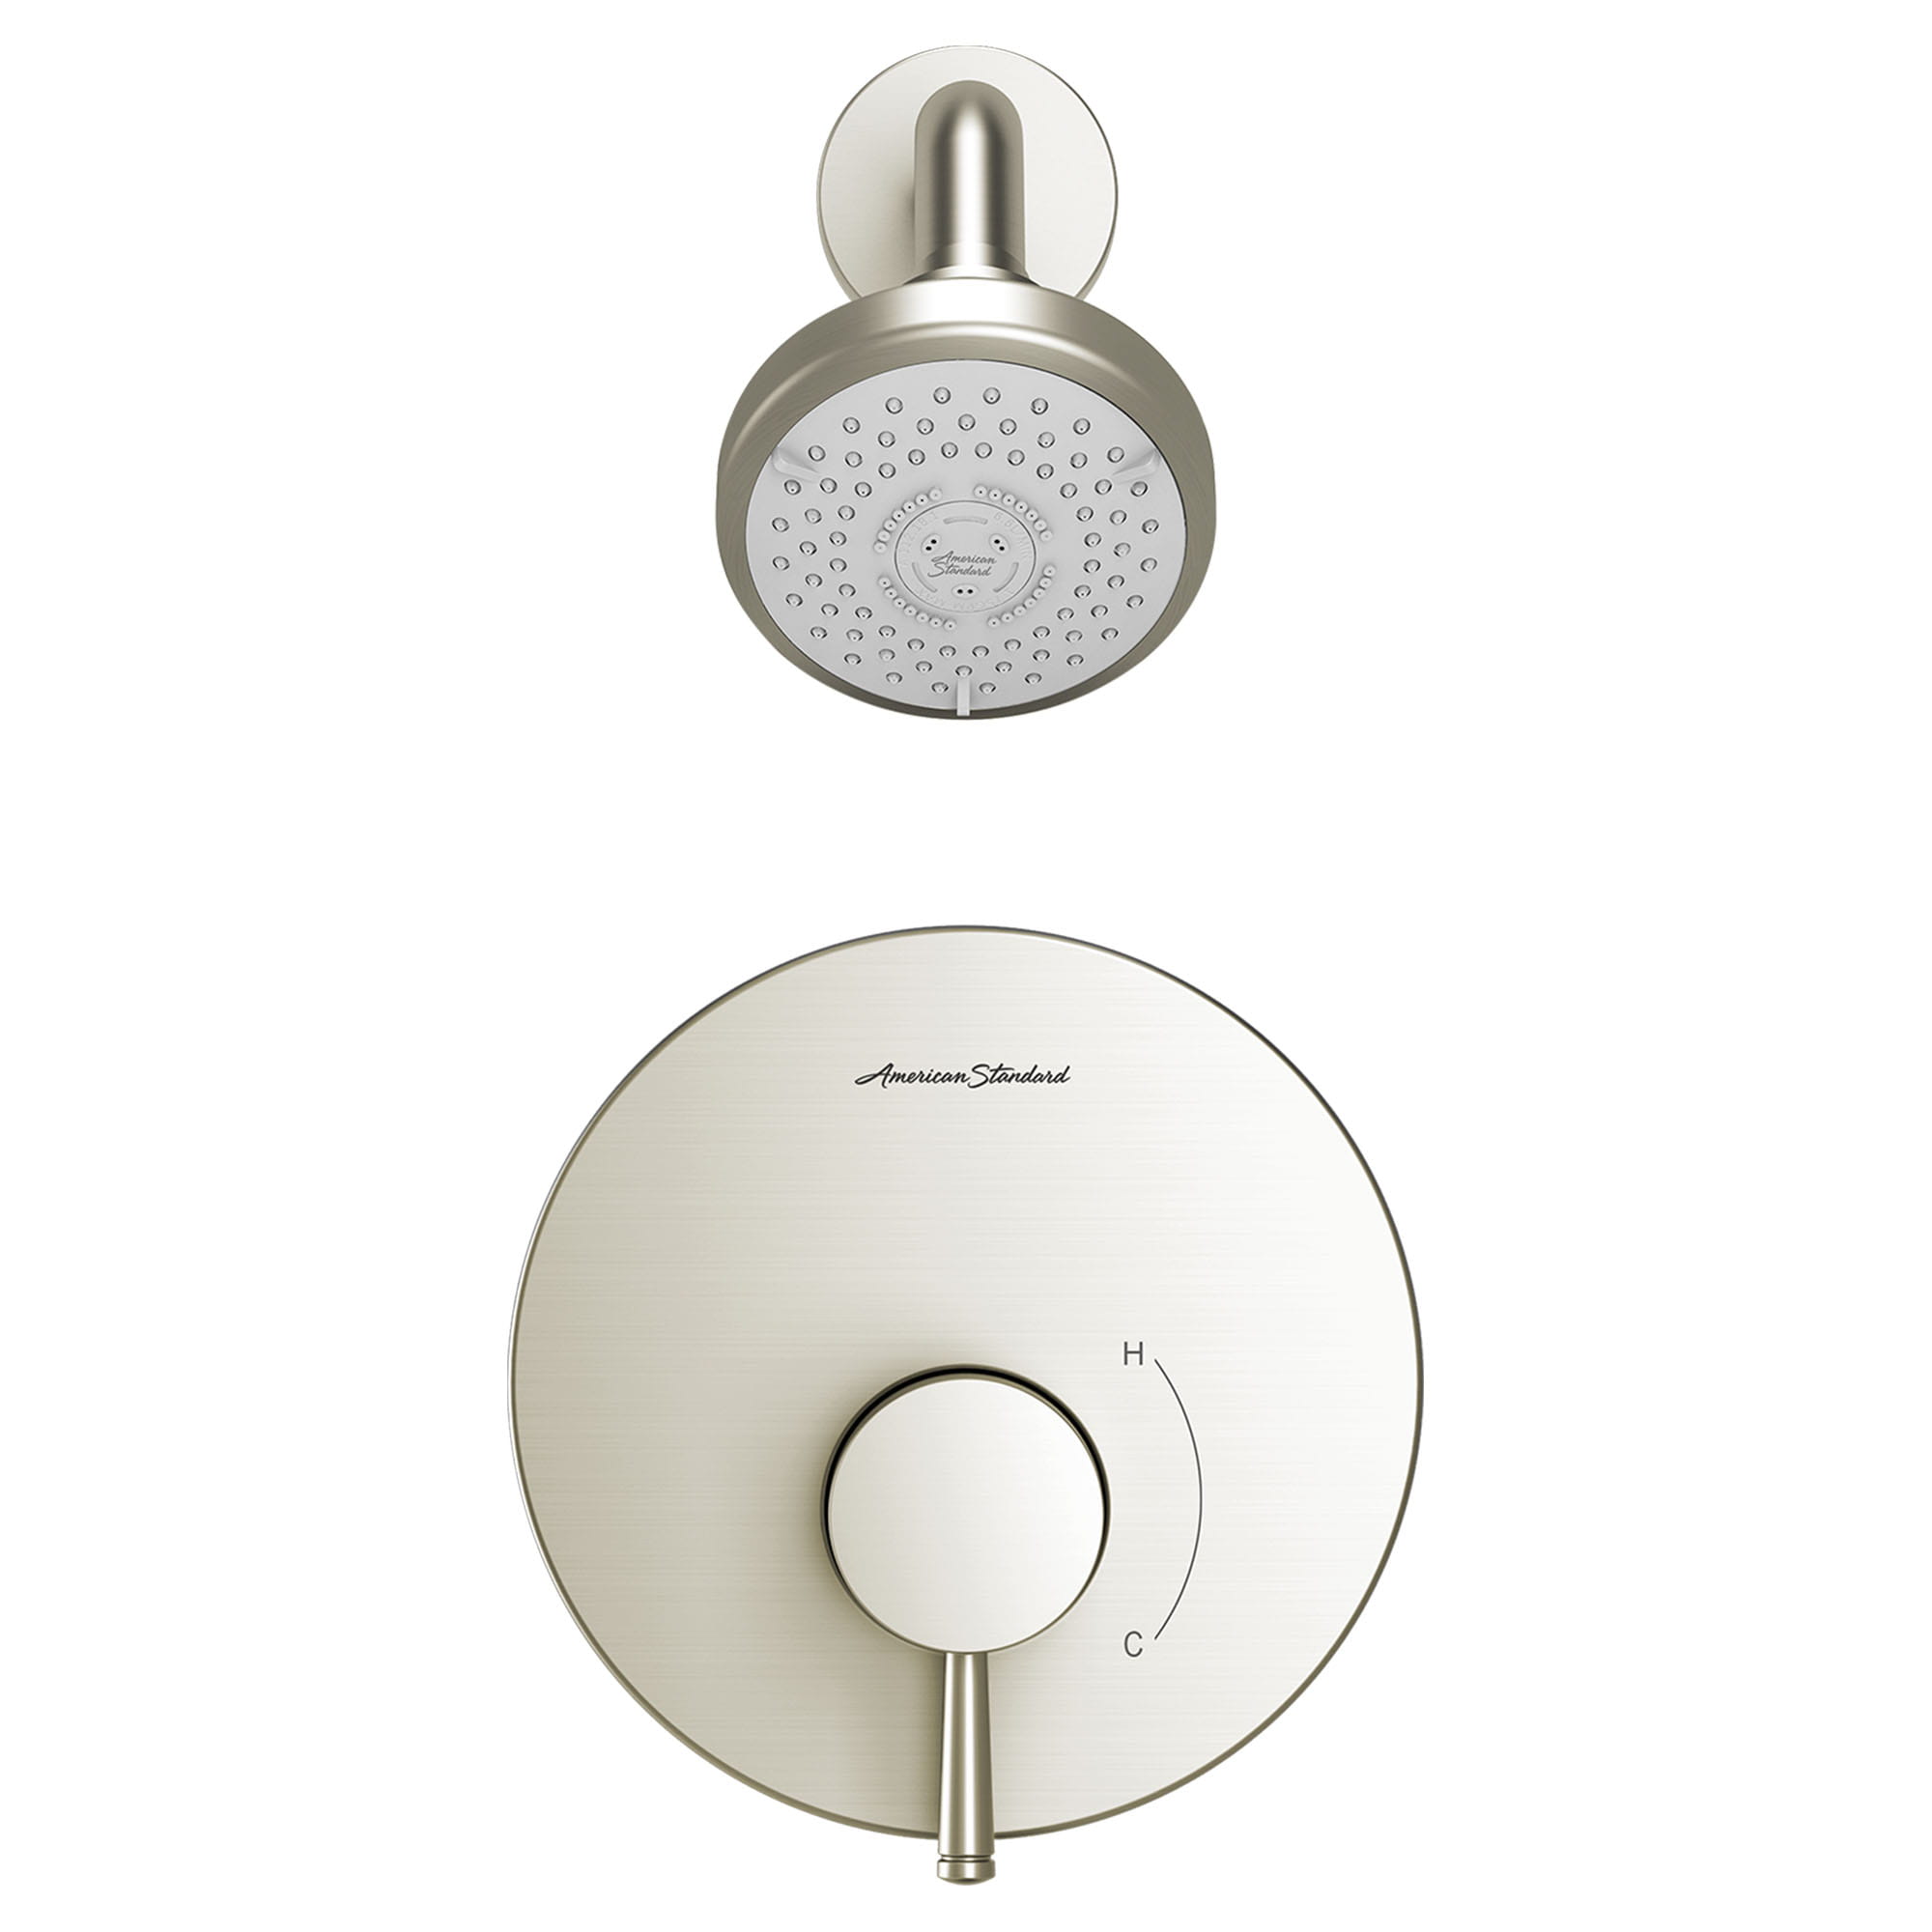 Serin 175 gpm 66 L min Tub and Shower Trim Kit With Water Saving 3 Function Shower Head Double Ceramic Pressure Balance Cartridge With Lever Handle   BRUSHED NICKEL